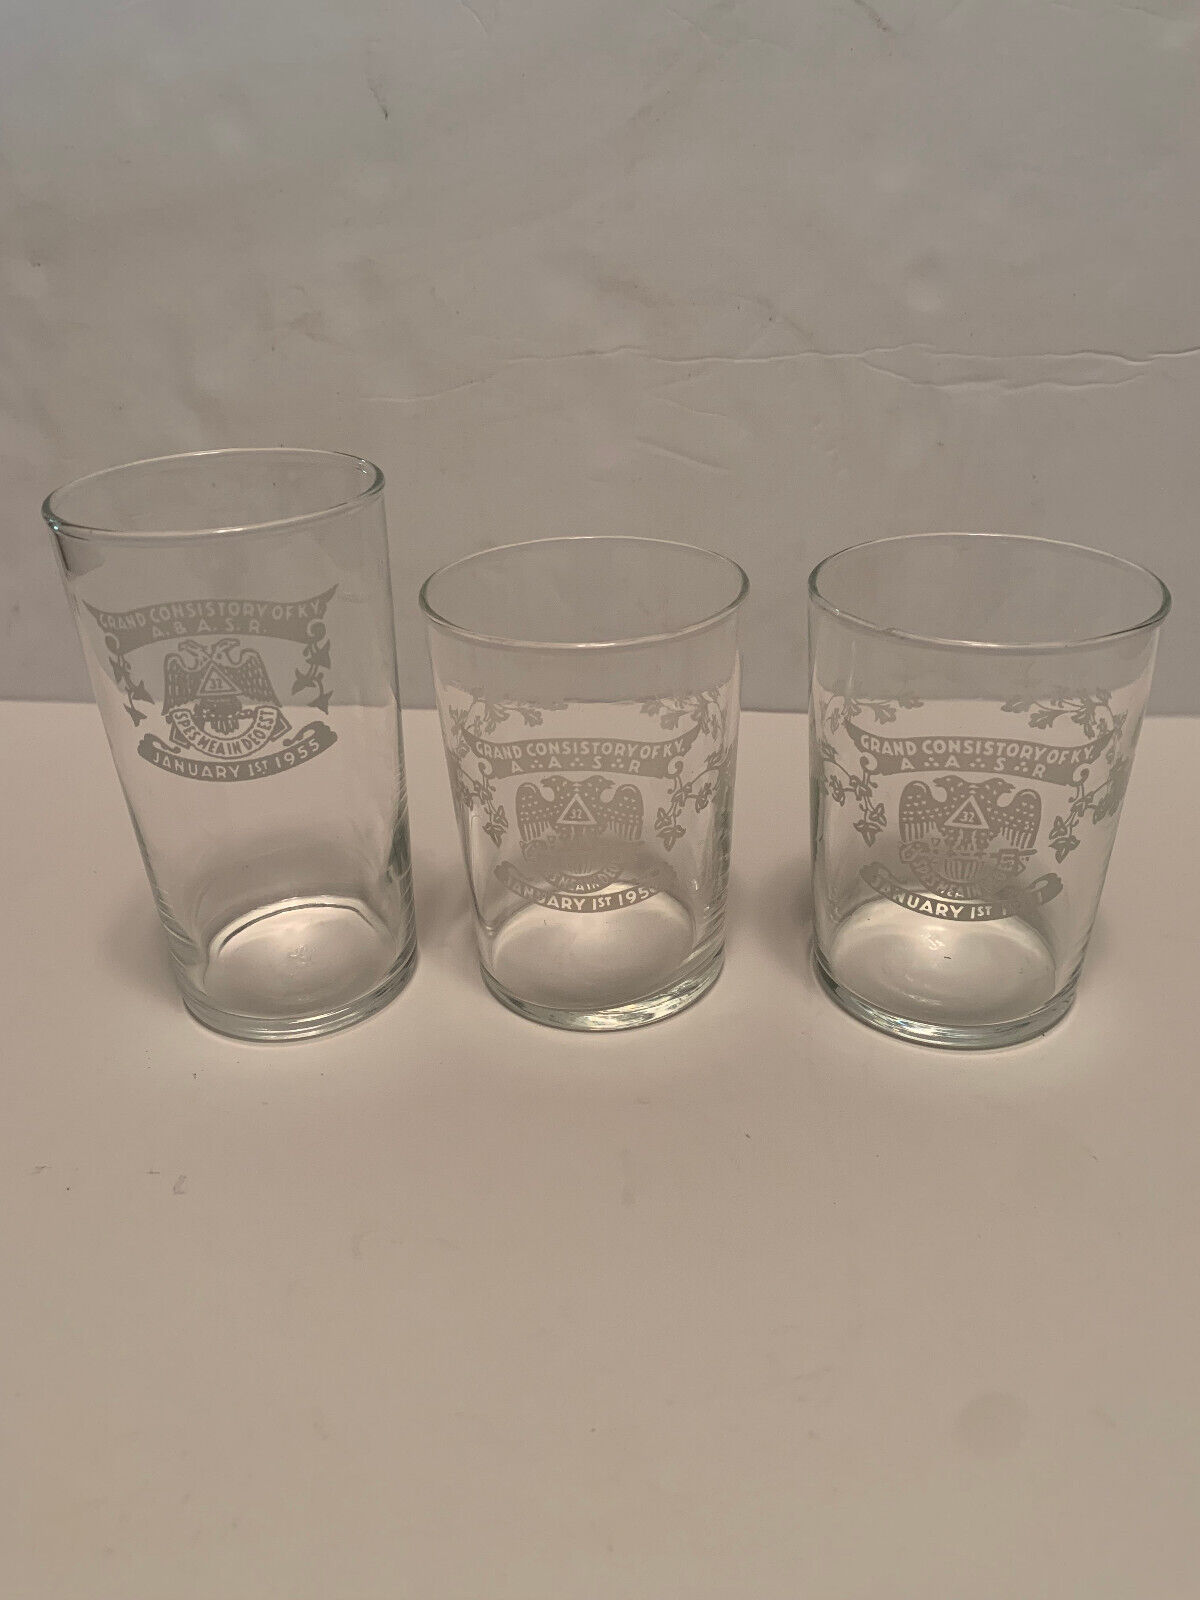 1955, 1956, and 1961 Grand Consistory Of KY Glasses